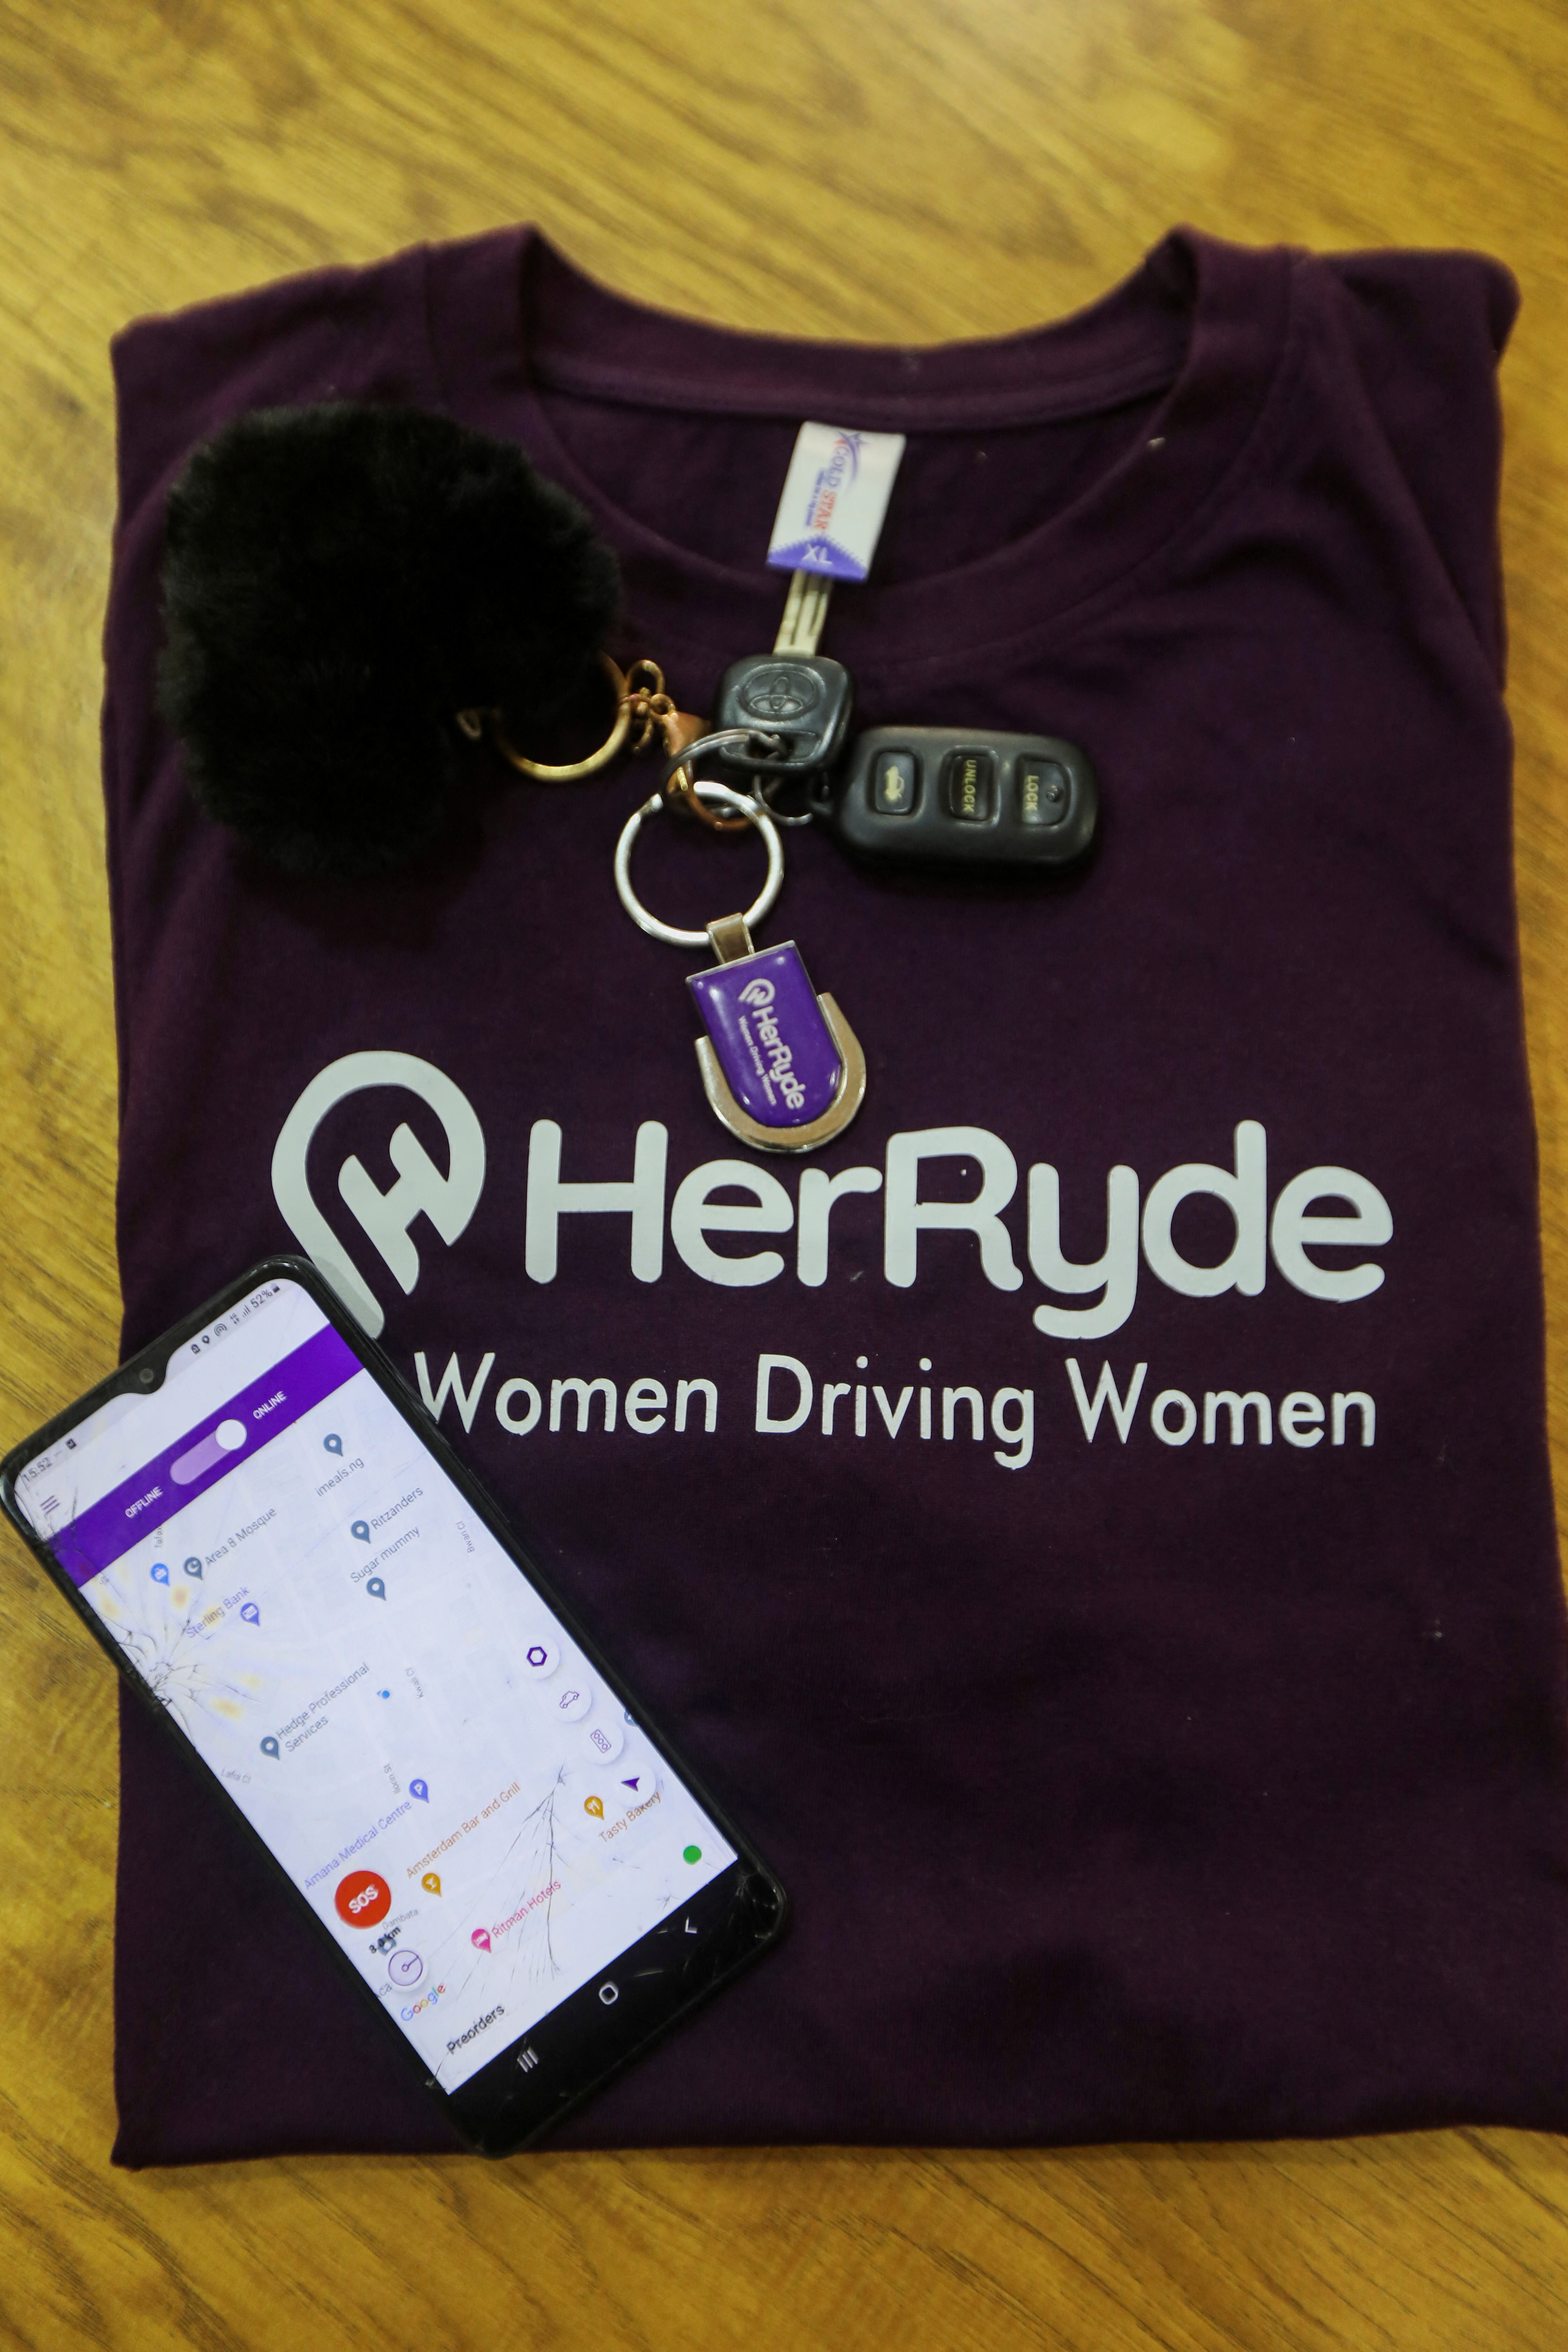 A car key and a t-shirt of HerRyde, a ride-hailing app with exclusively women drivers, are placed on a table, in Abuja